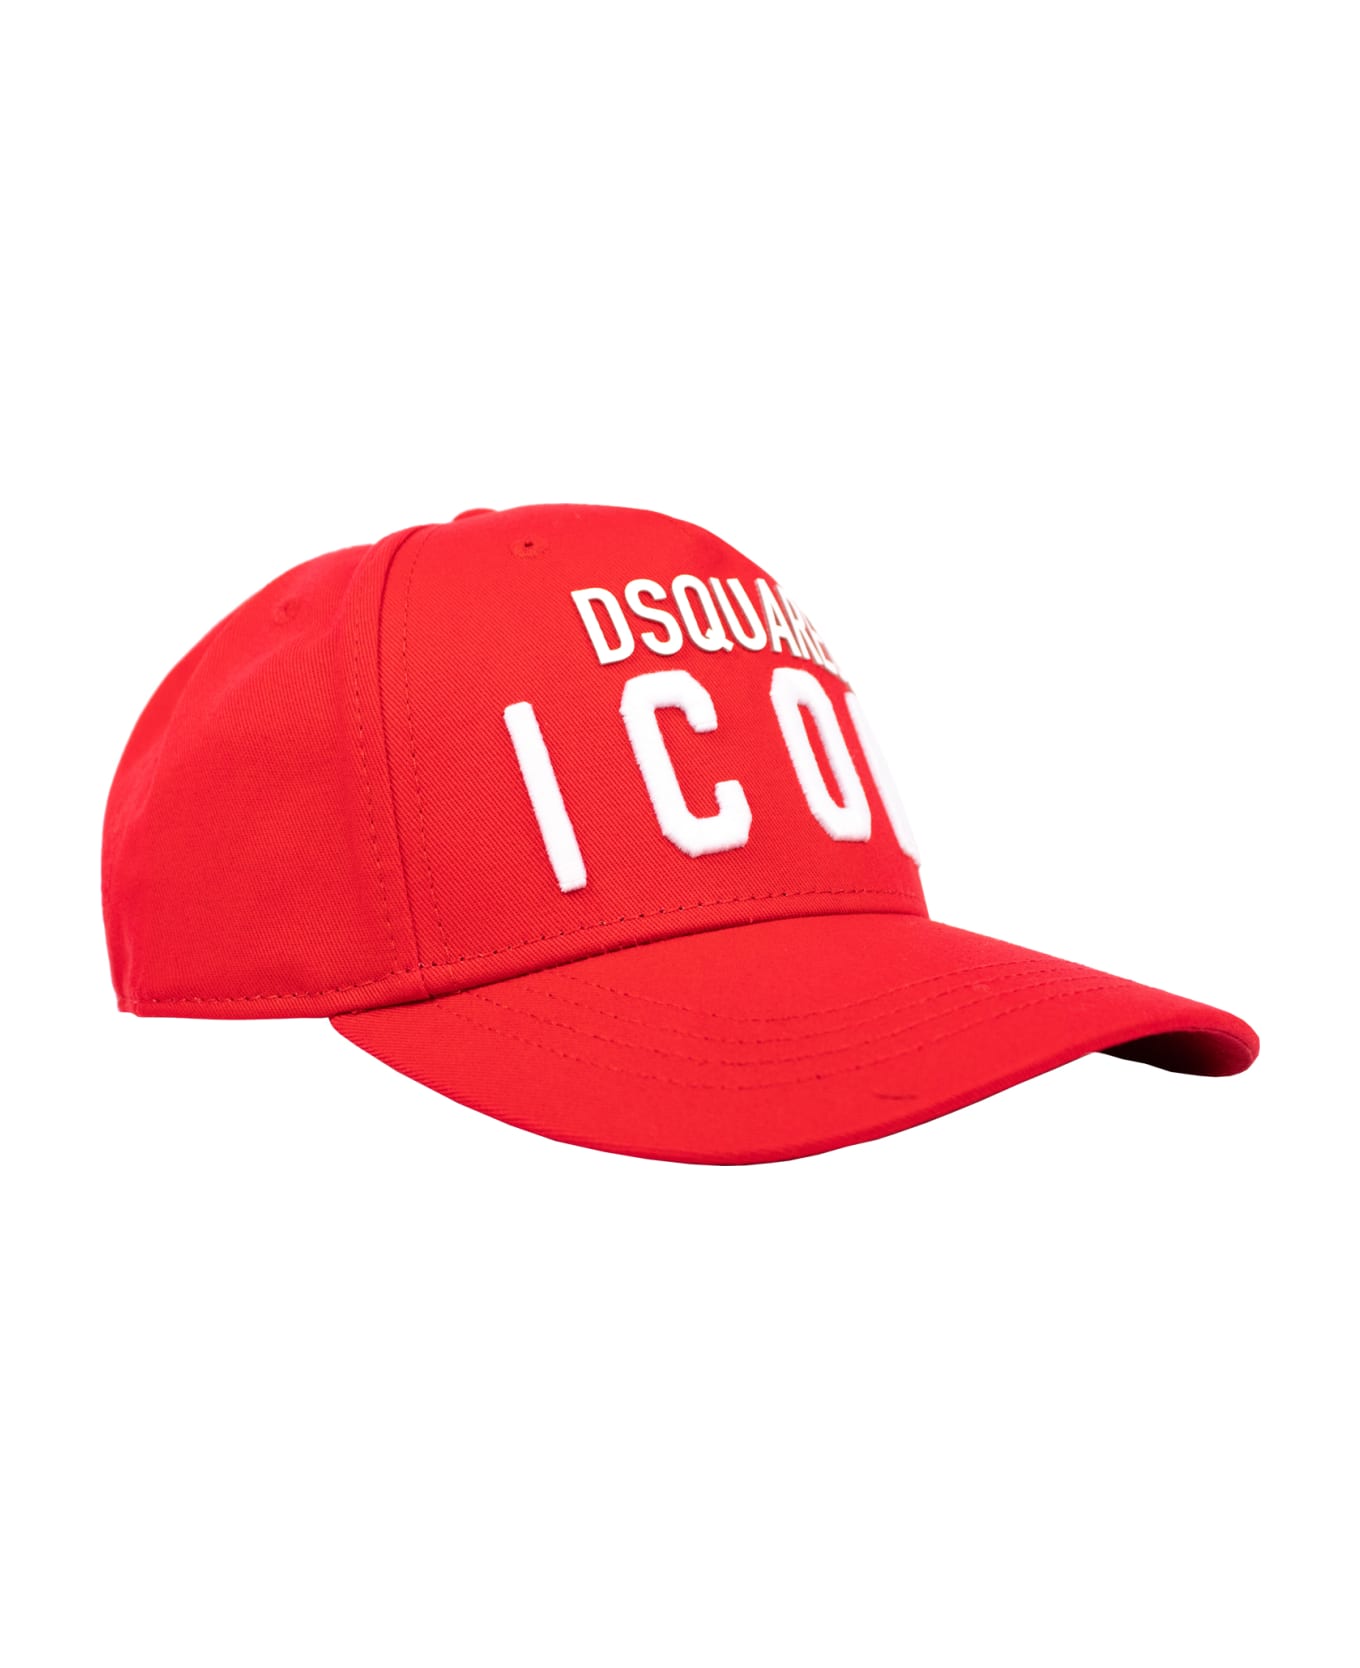 Dsquared2 "icon" Baseball Hat - Red